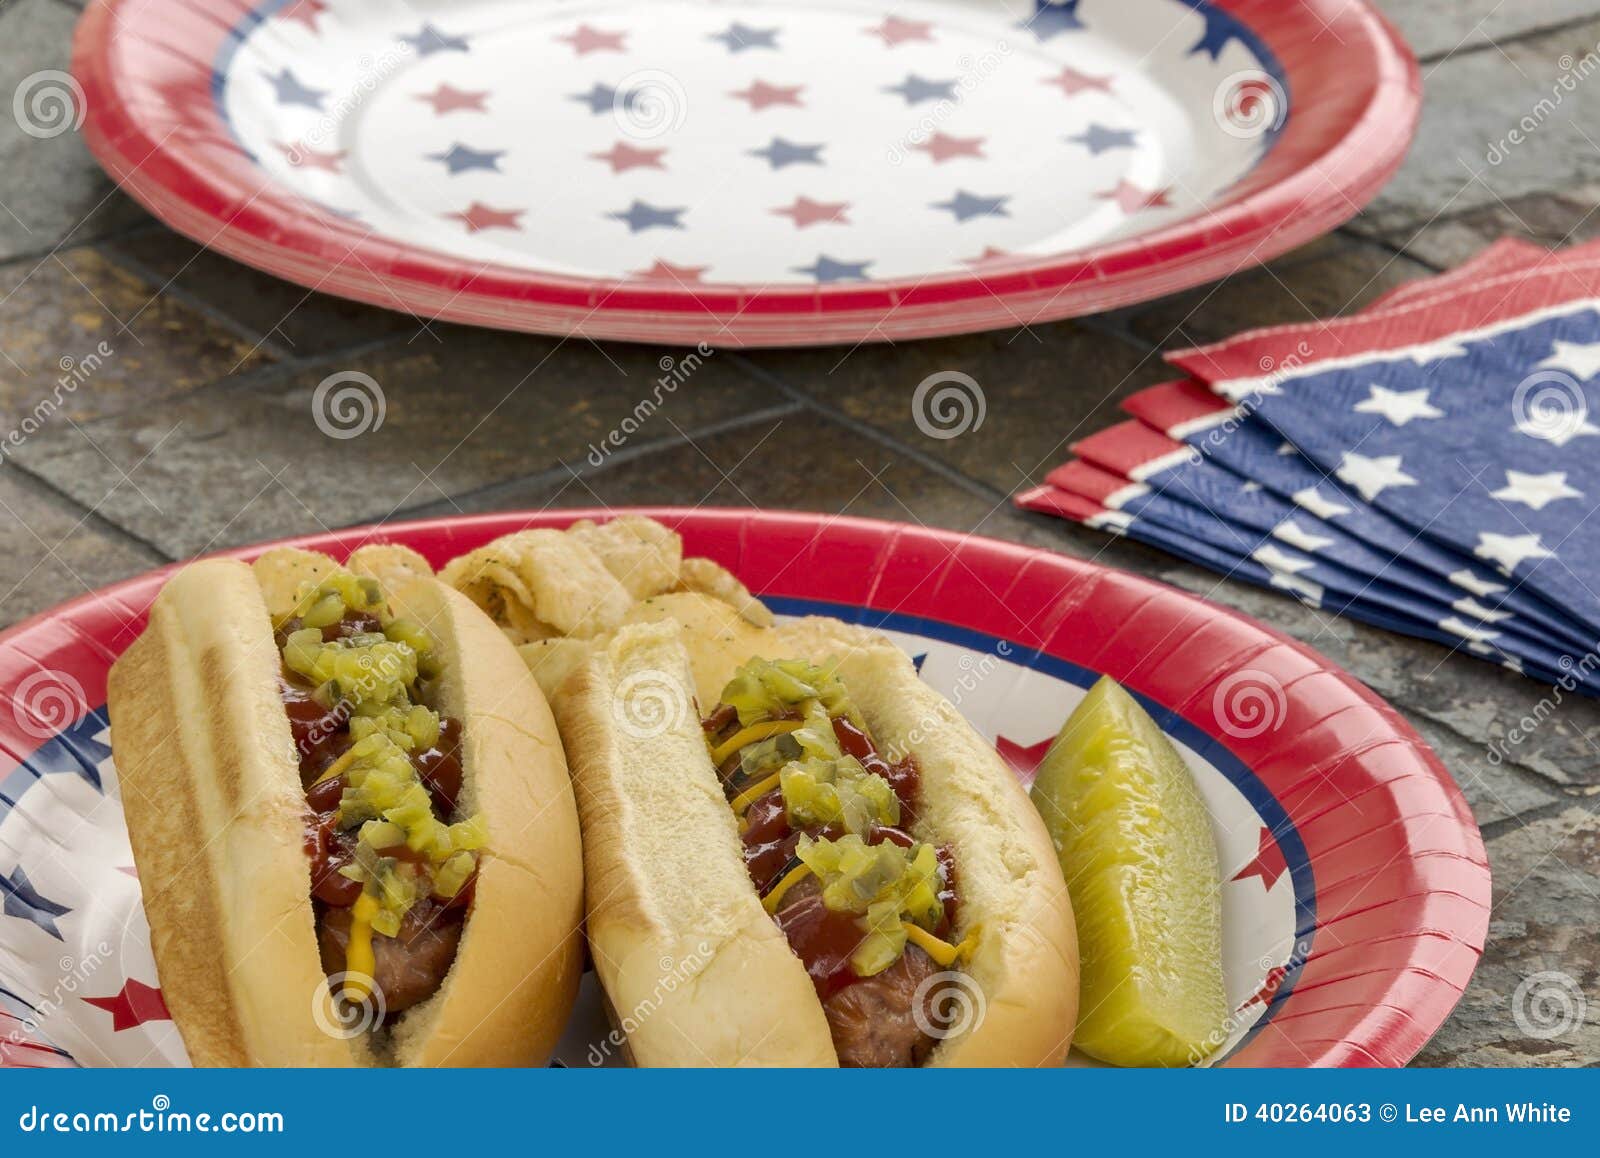 loaded hotdogs at a holiday bbq and cookout